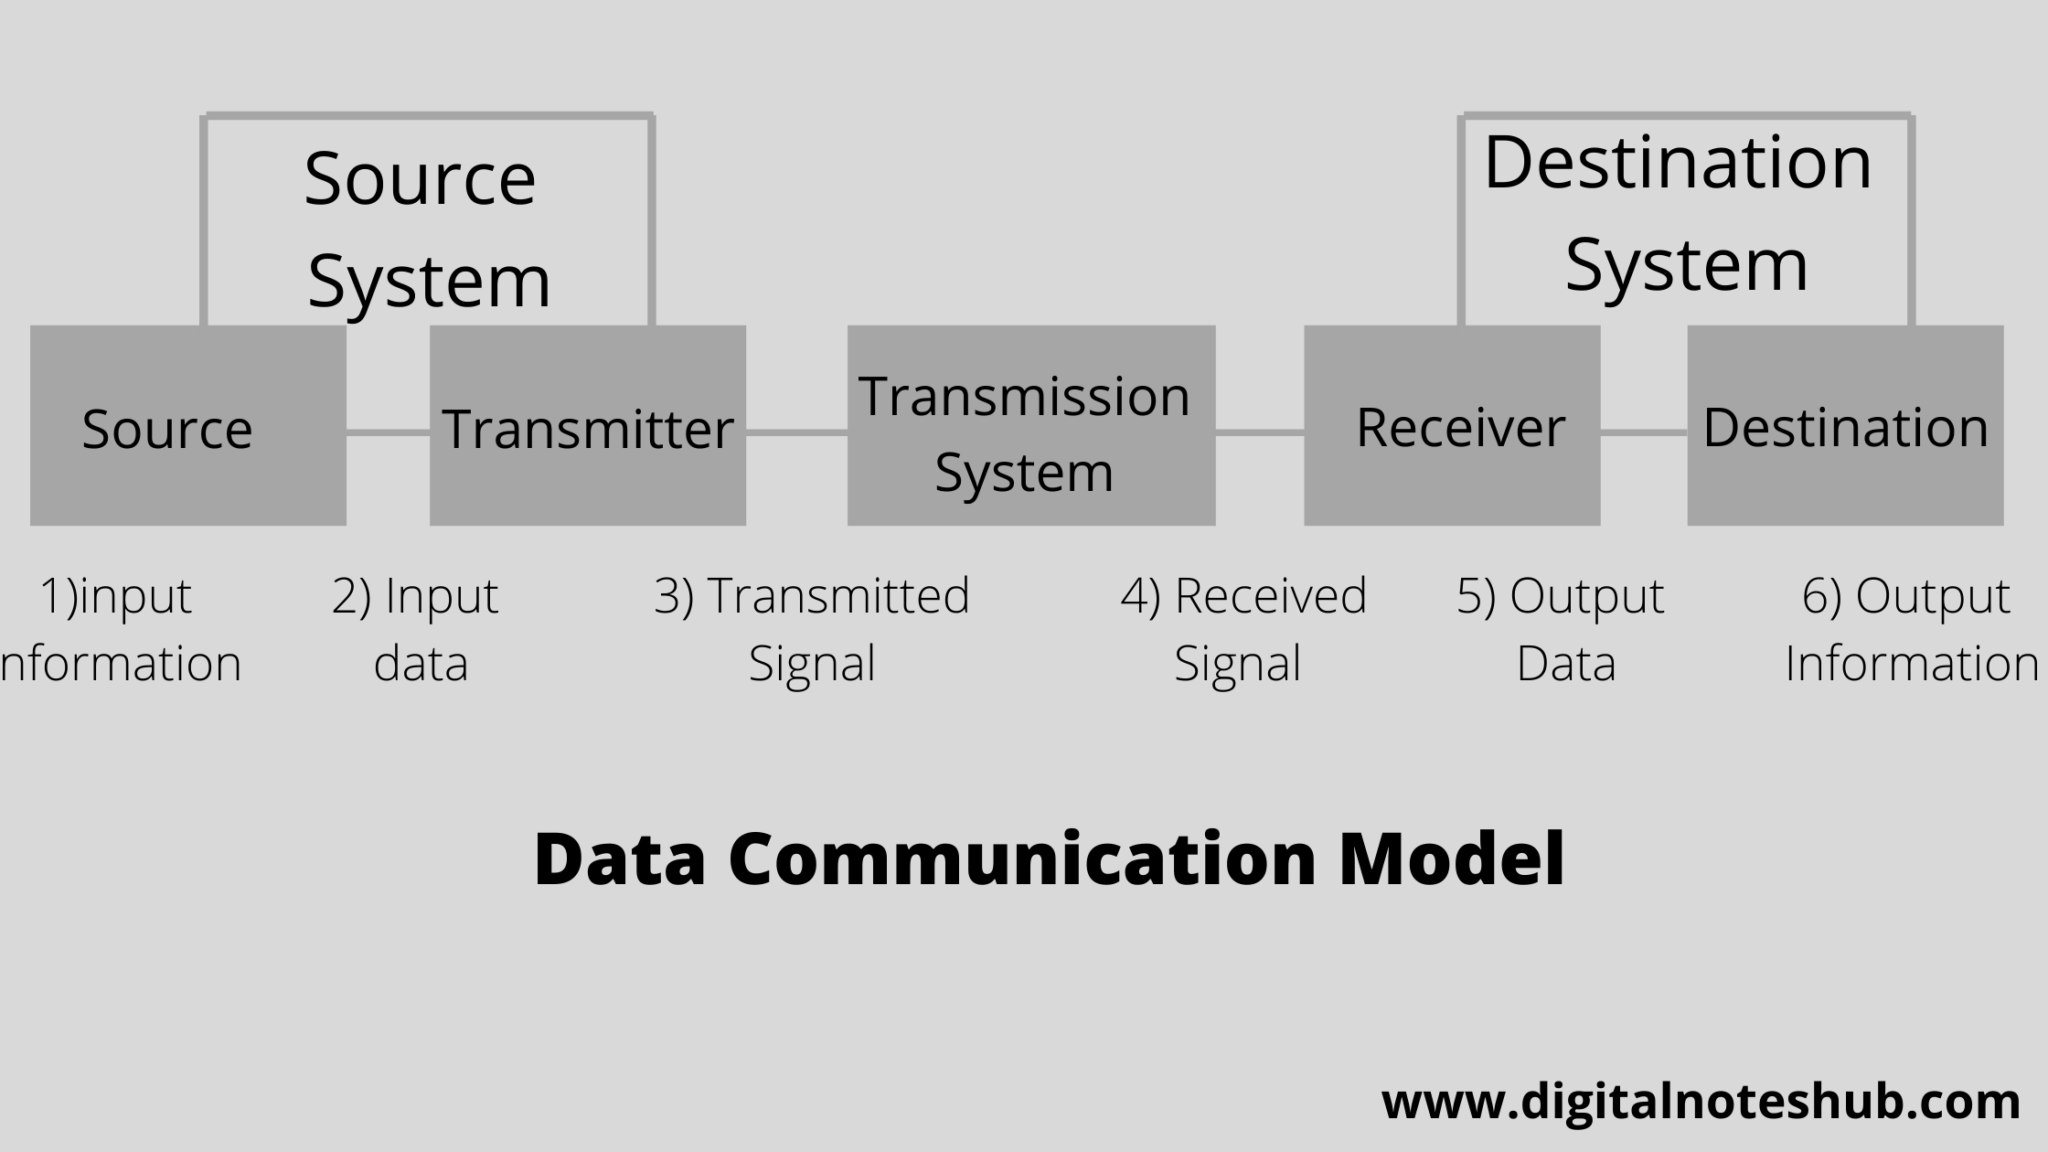 research on data communications